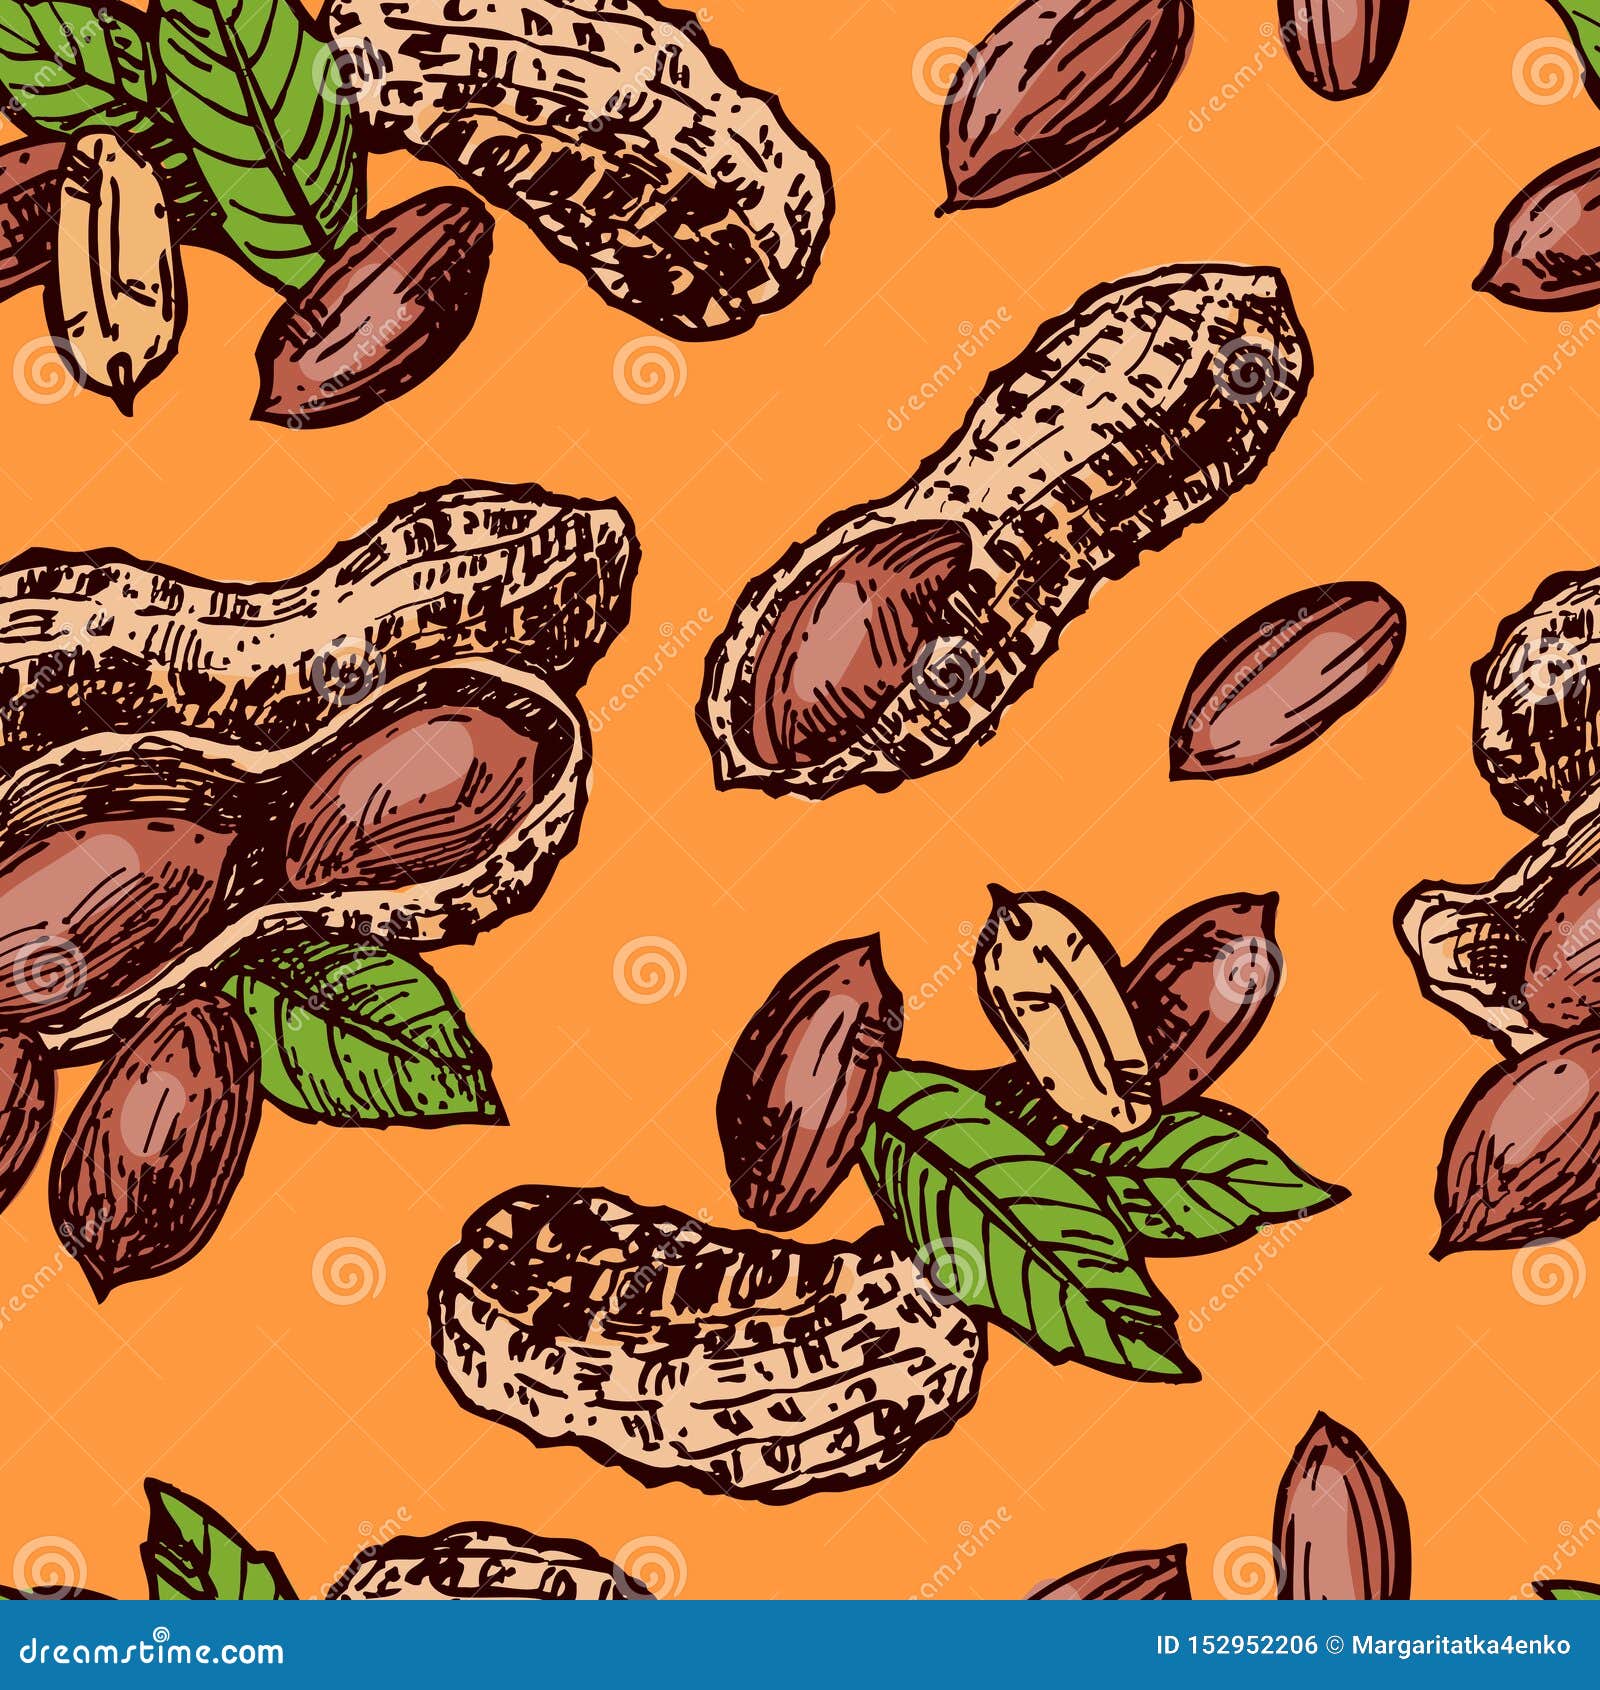 Nuts Legume Beans Vector  Photo Free Trial  Bigstock